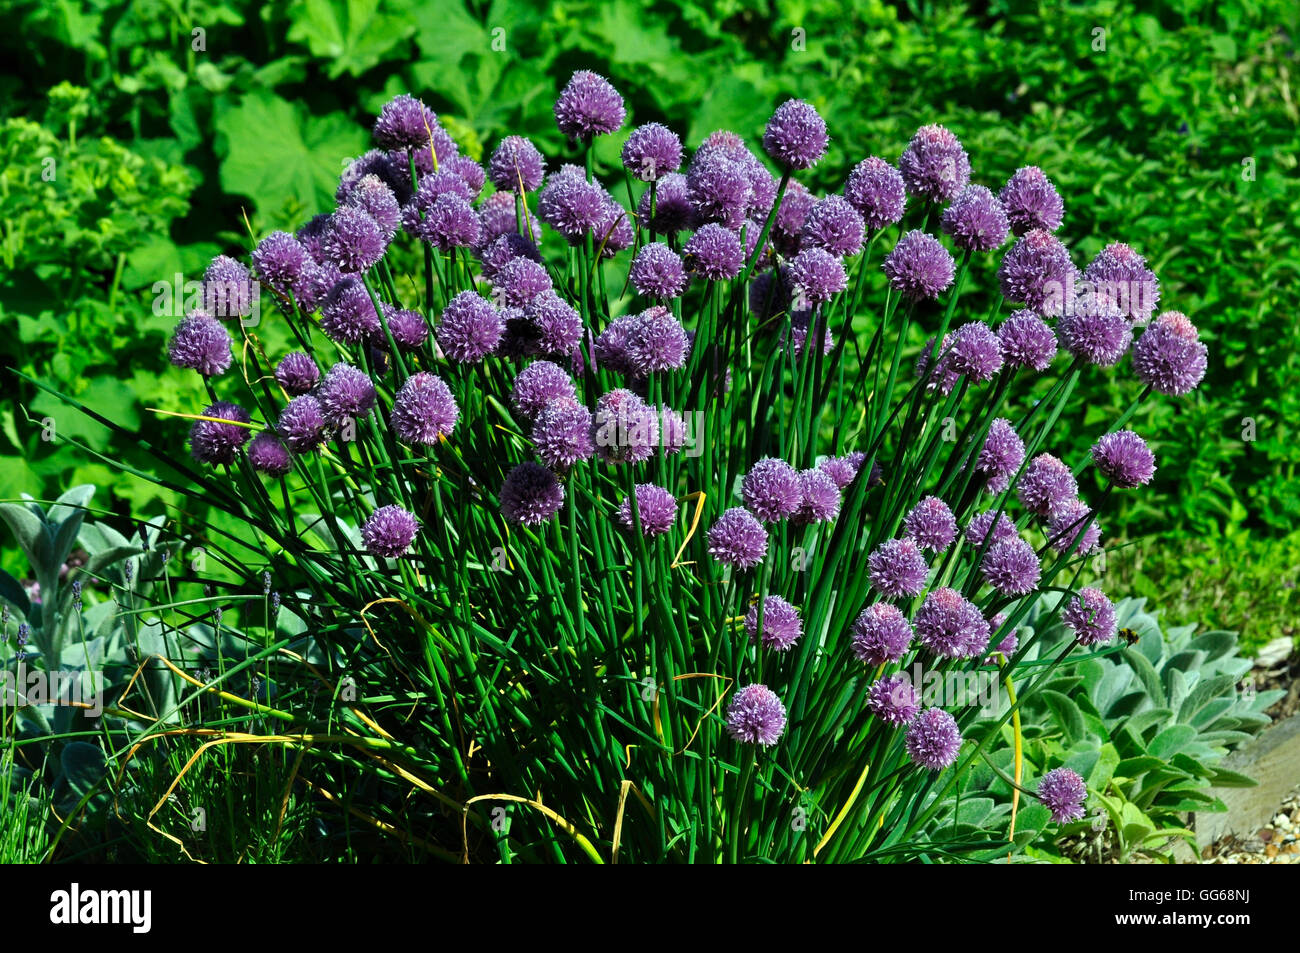 A clump of chives a garden herb UK Stock Photo